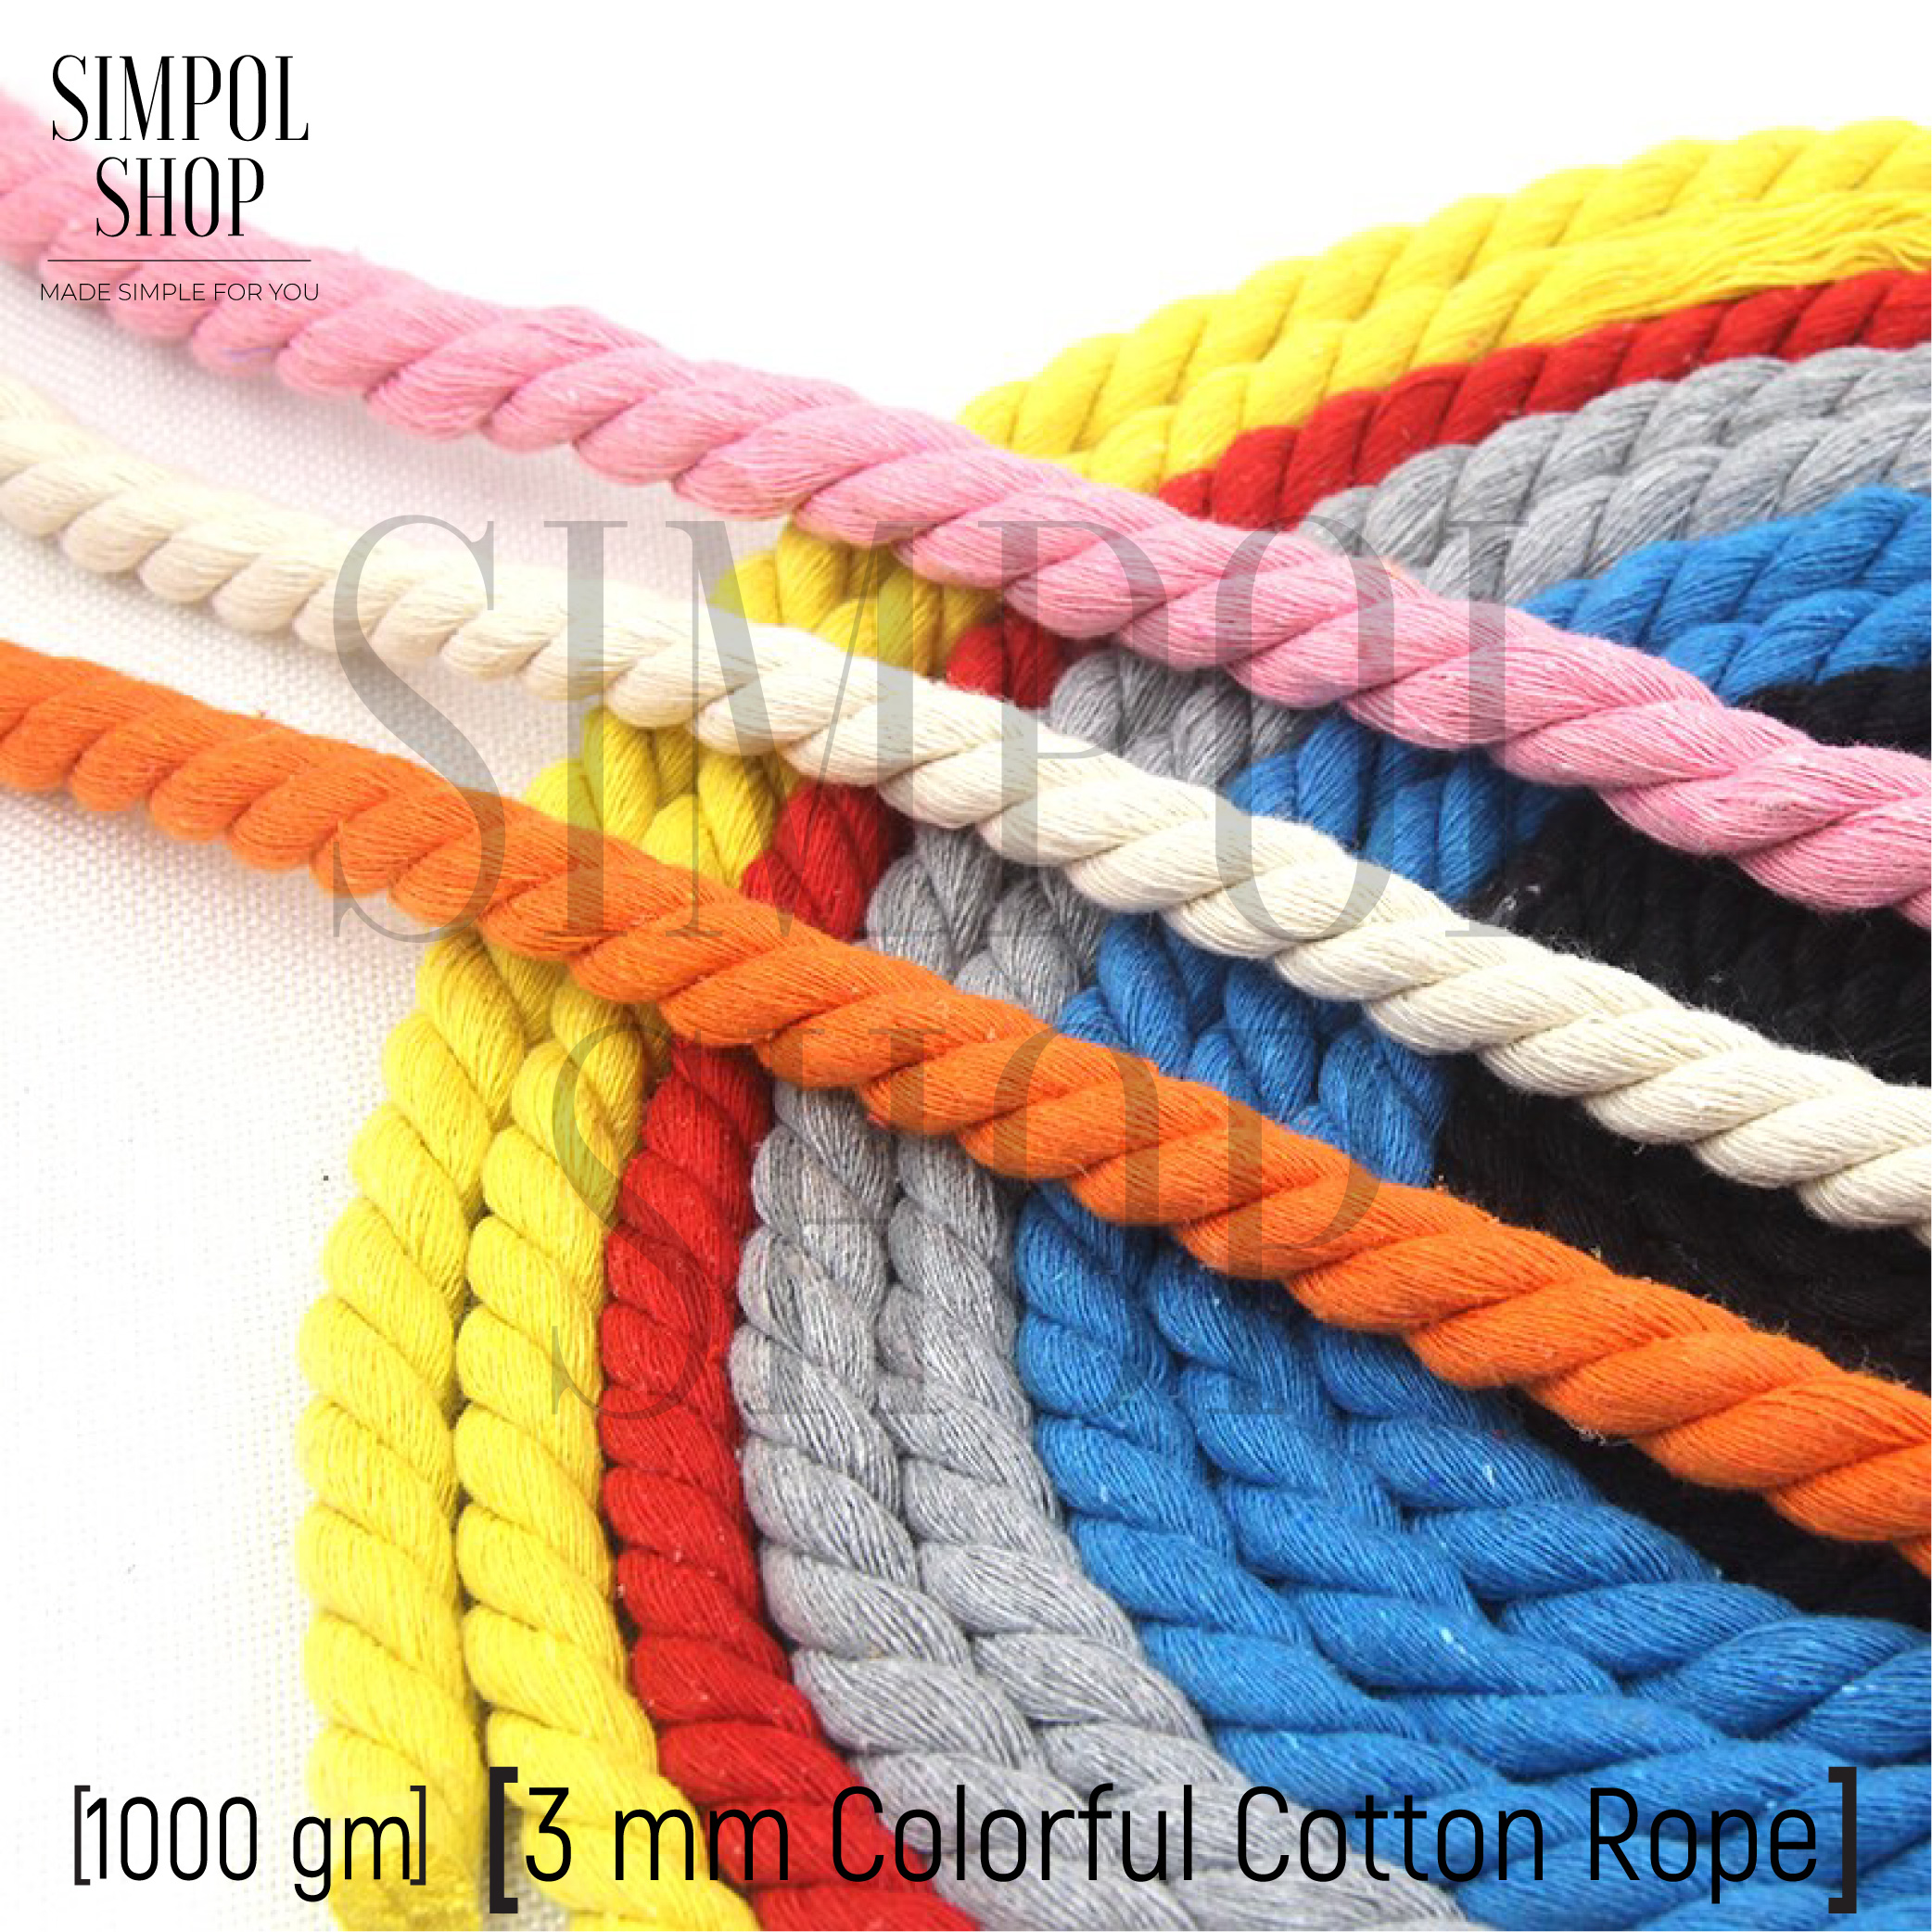 3 mm Colorful Cotton Rope- 1000 gm